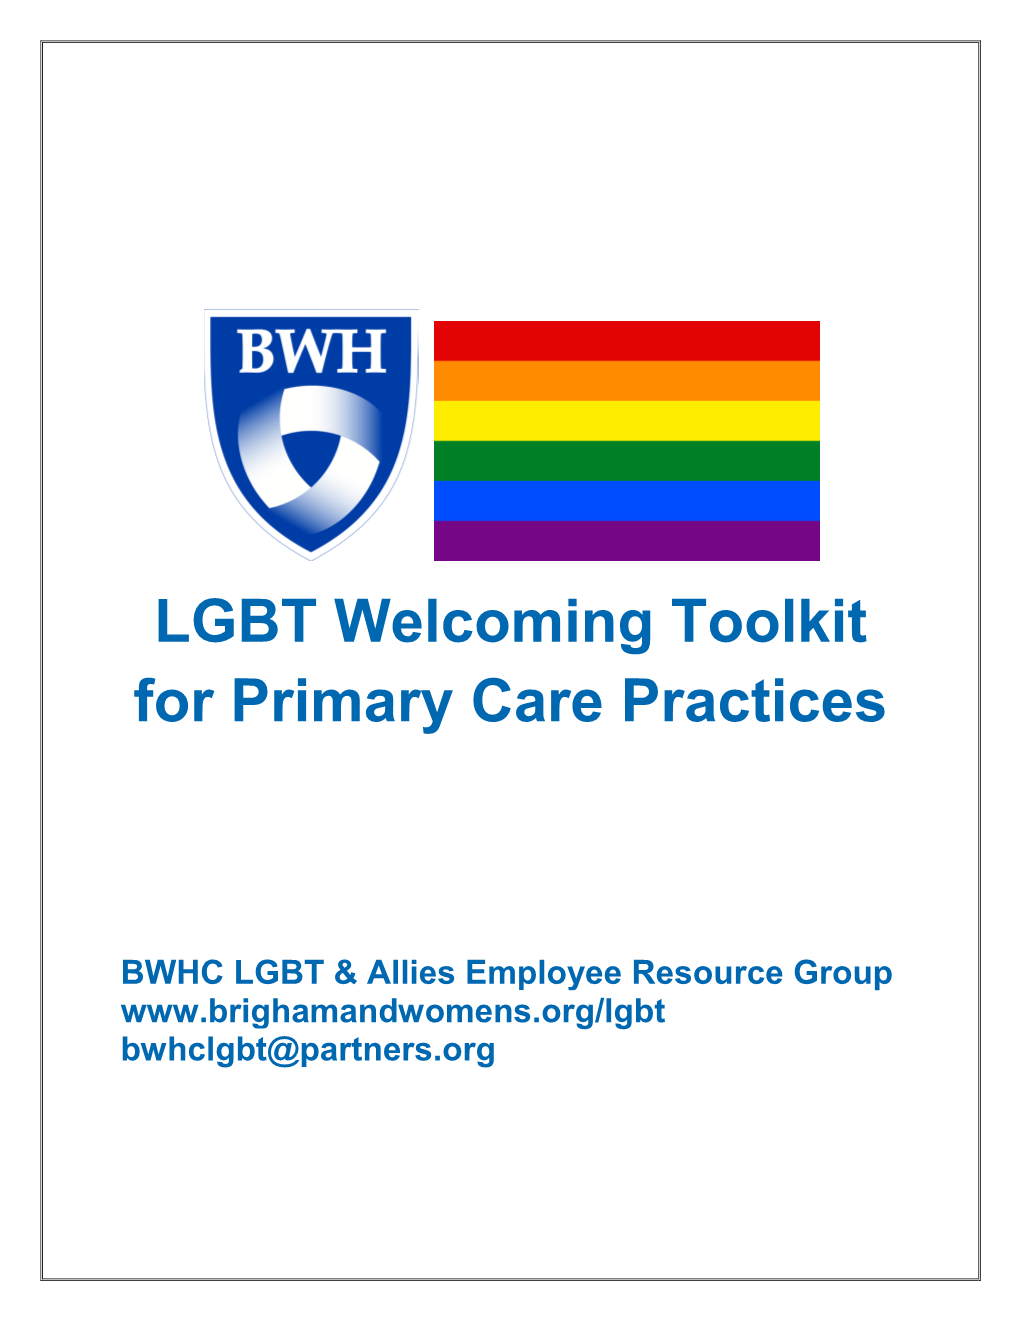 LGBT Welcoming Toolkit for Primary Care Practices